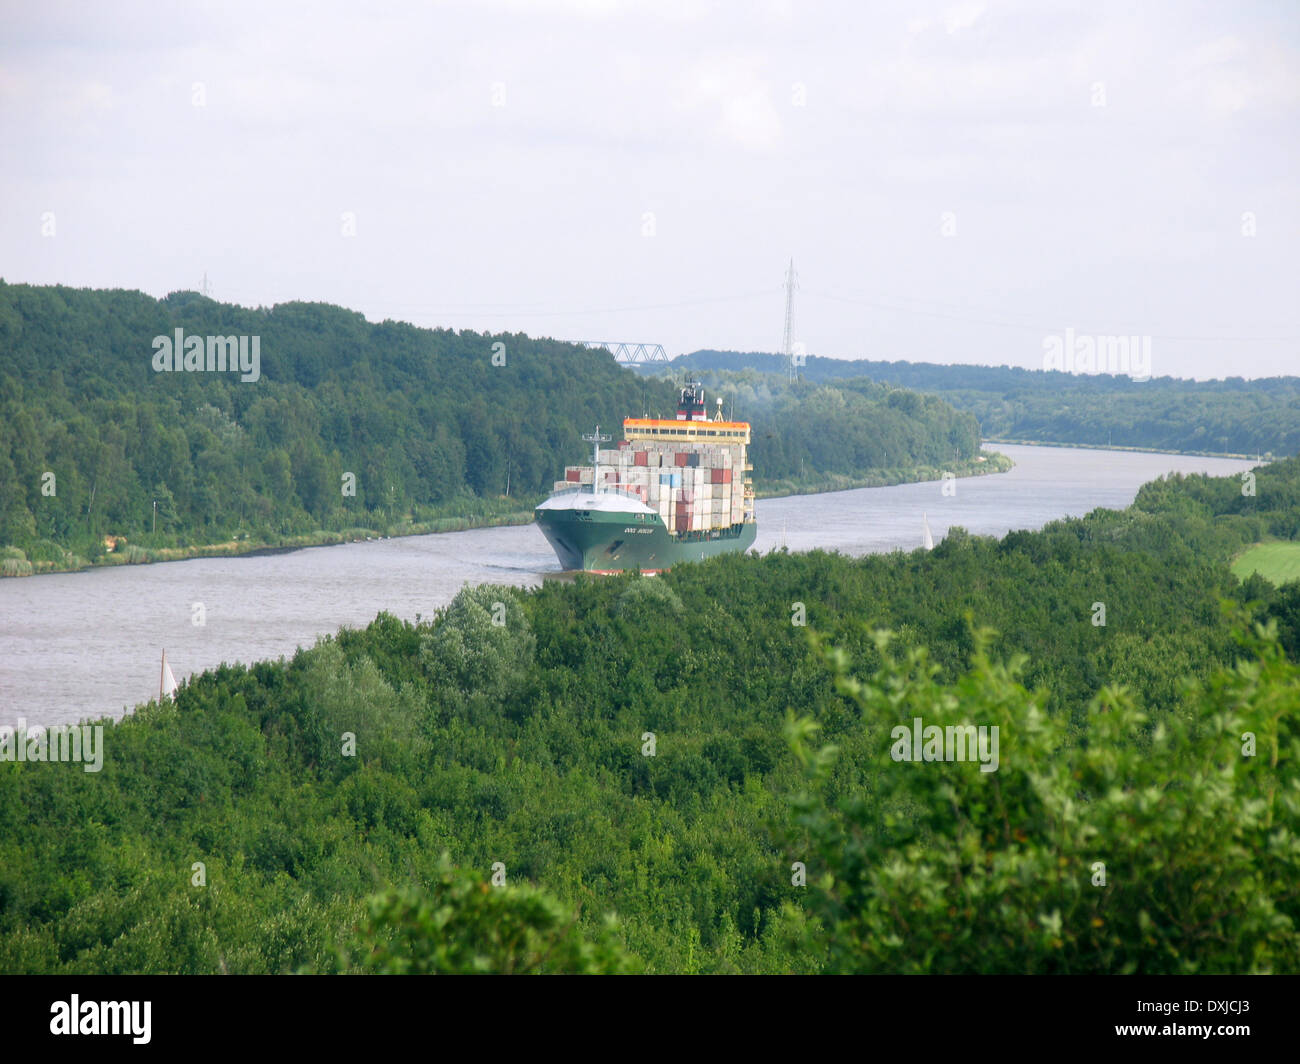 The Kiel Canal. The Kiel Canal connects the North Sea with the Baltic Sea (Kiel Fjord). This waterway is the most frequented artificial waterway in the world based on the number of ships. Photo: Klaus Nowottnick Date: August 02, 2008 Stock Photo